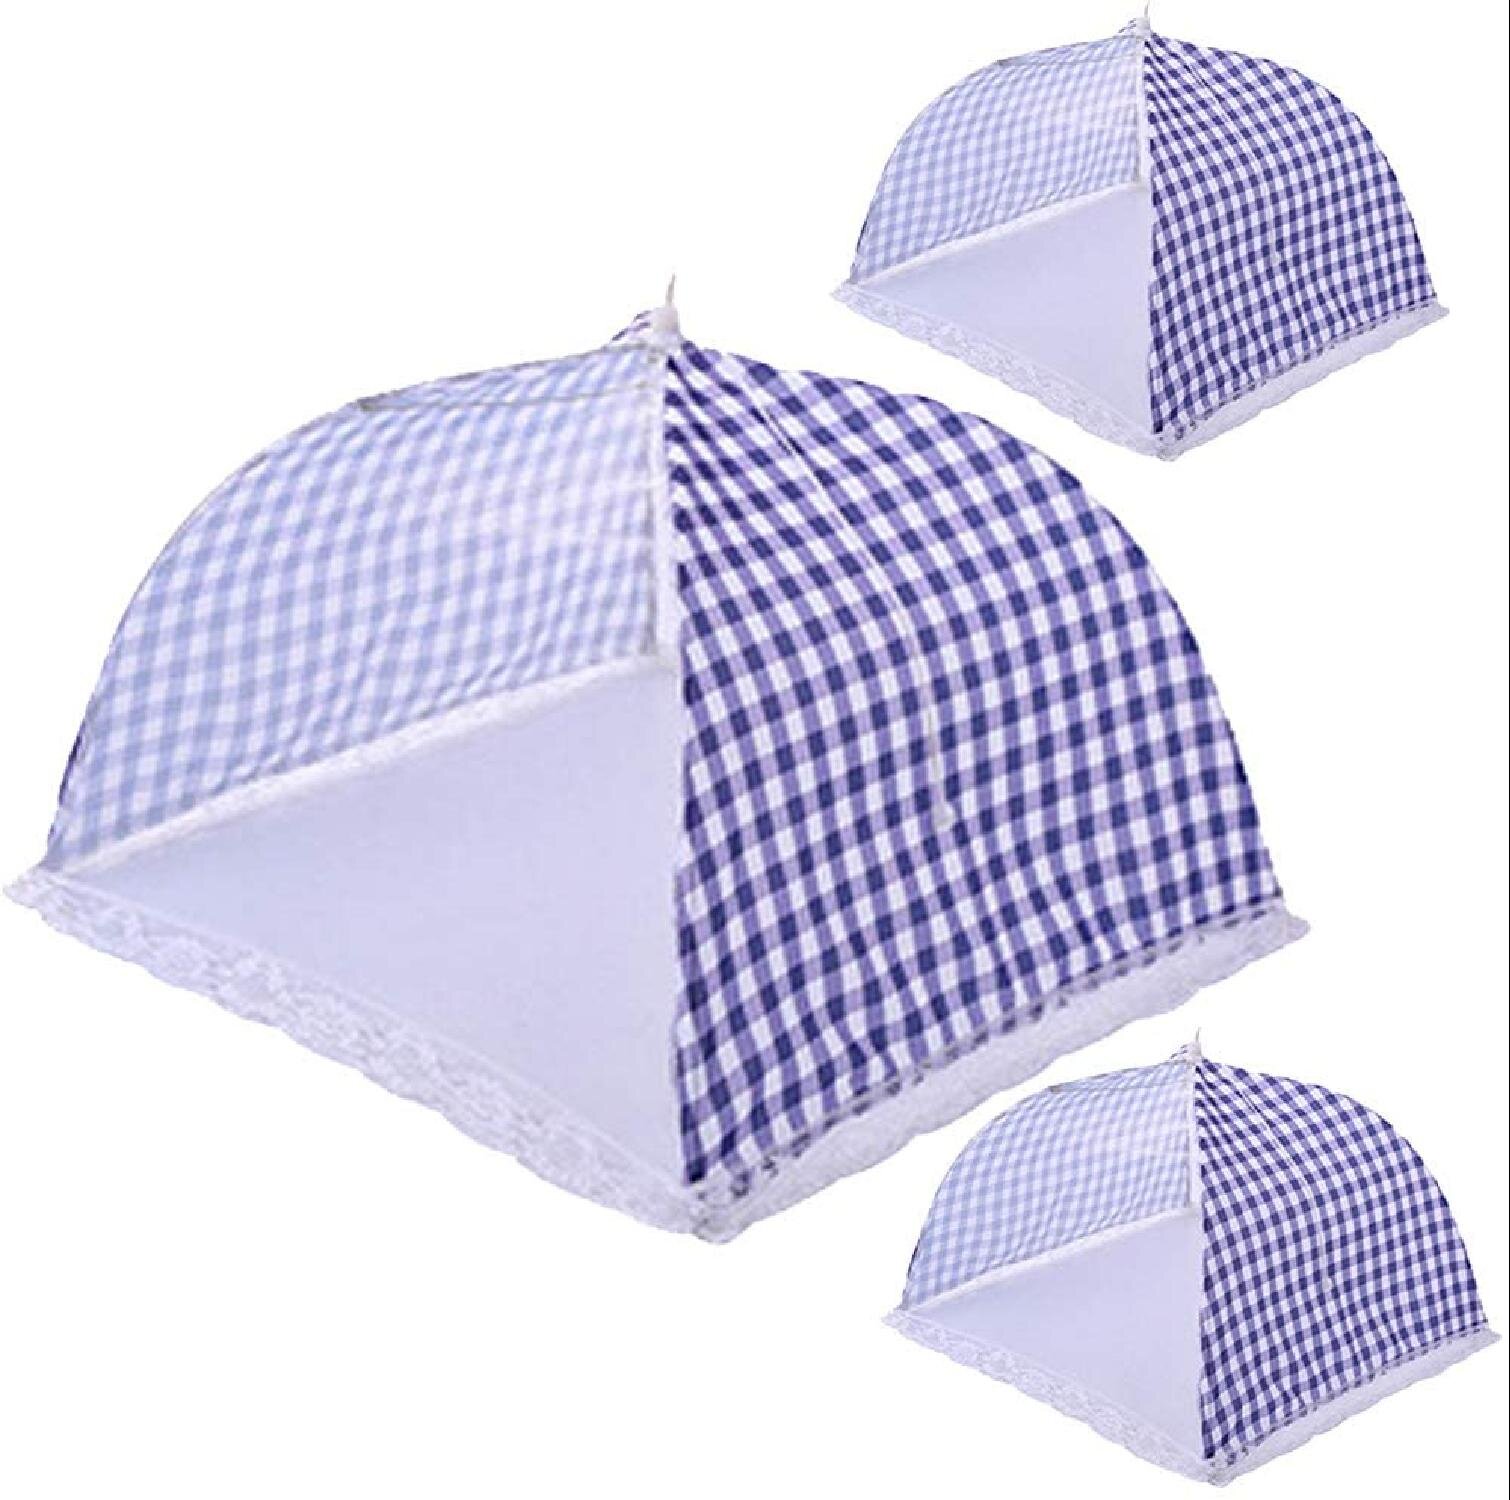 Details about   Mesh Screen Food Cover Tents Set of 4 Umbrella Screens to Keep Bugs And Flies 